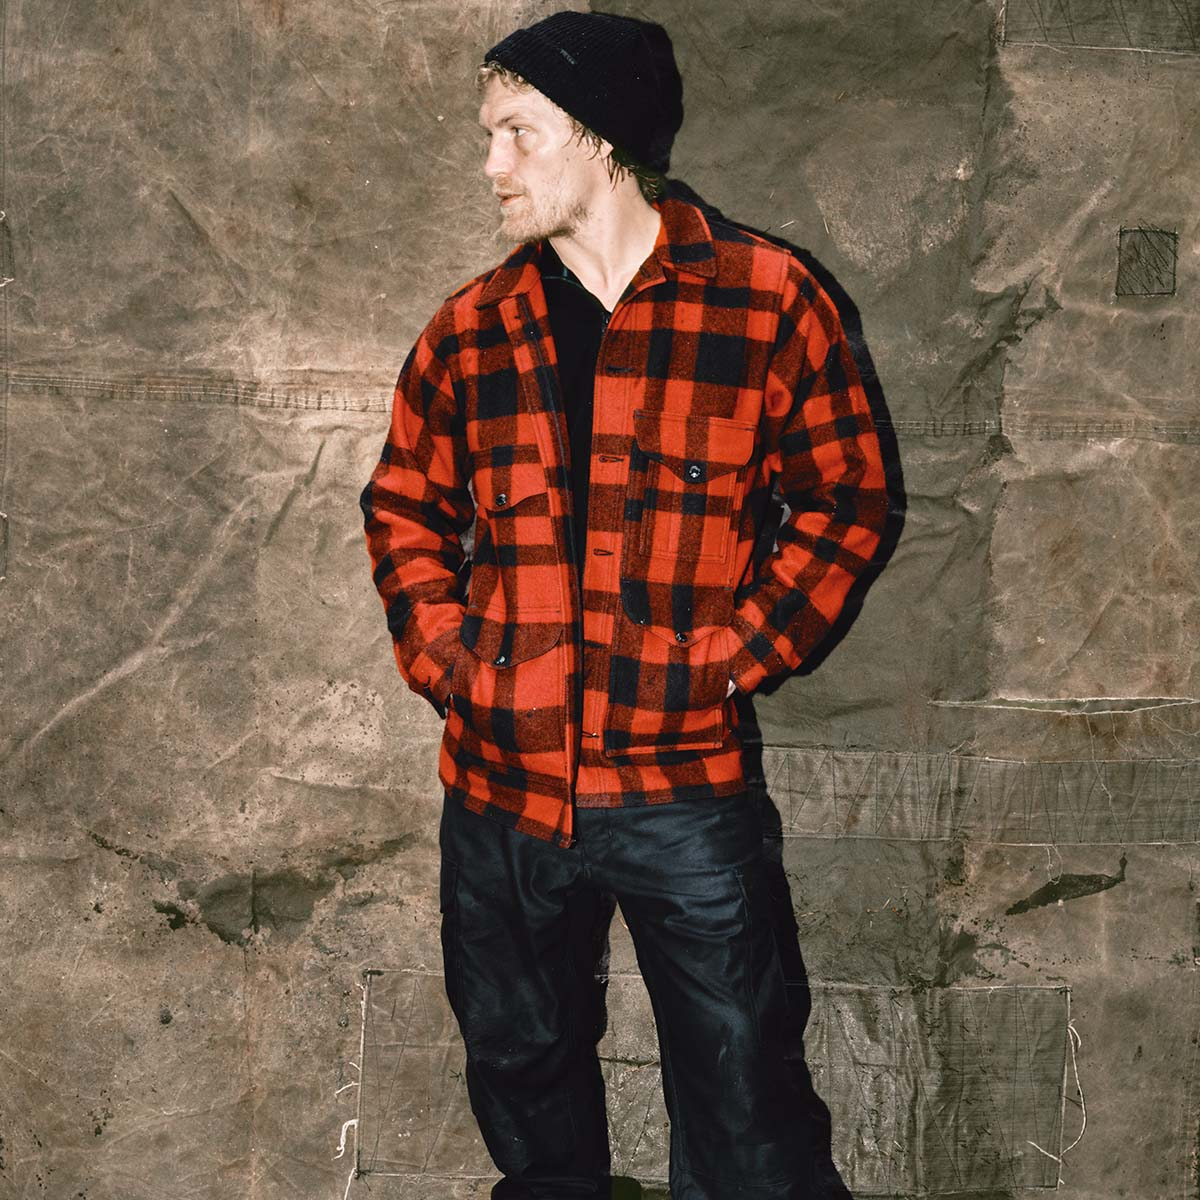 Filson Mackinaw Wool Cruiser Jacket Red Black, Made of 100% virgin Mackinaw Wool for comfort, natural water-repellency and insulating warmth in any weather conditions.